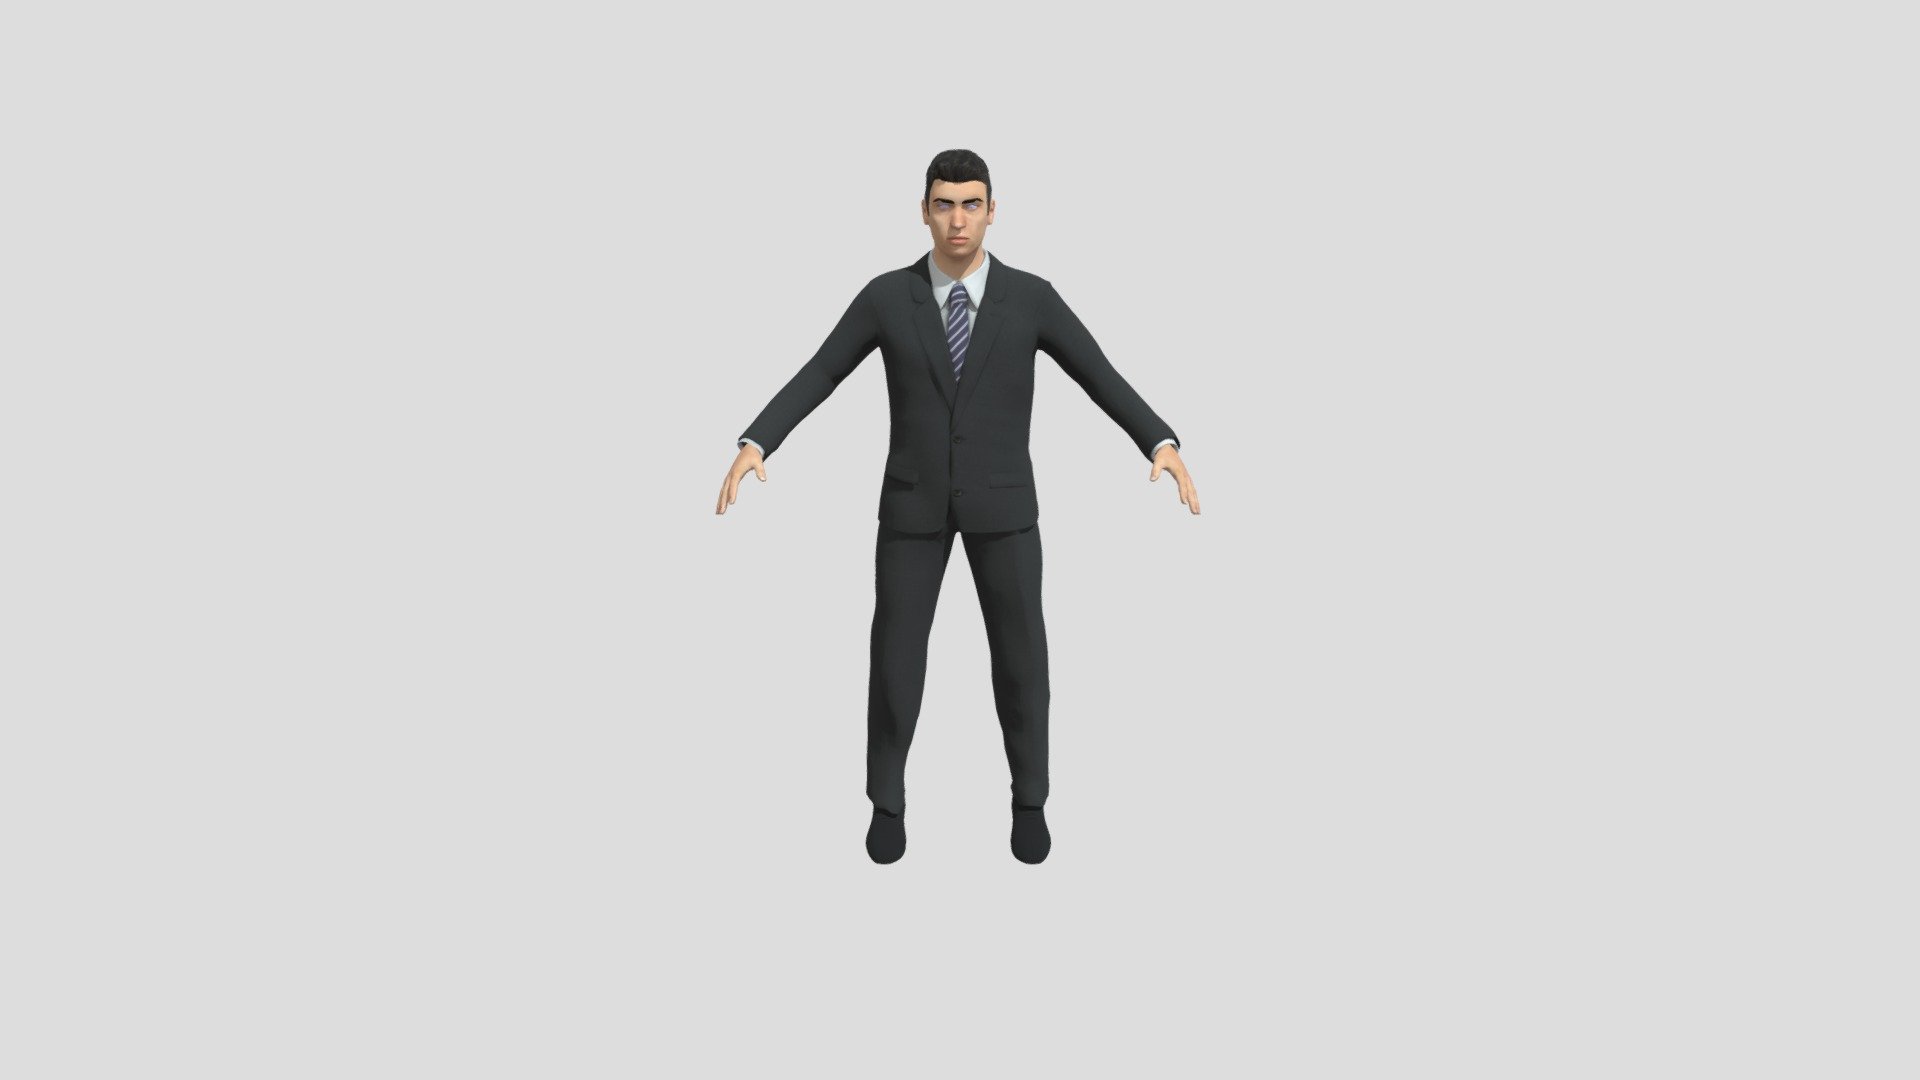 Man dressed in suit

When importing, selecting, if necessary, you can change the size of the model.

All formats tested and working.

The models are polygonal (verts and tris).

UVMapped, Low-poly 3D model.

For ease of use, objects are named logically (using the English language).

I'm ready to answer any questions you may have about the model.

Face orientation is ok.

The package includes texture and uv mapping.

This part, while simple, has been tested with confidence and peace of mind that it can be downloaded 3d model